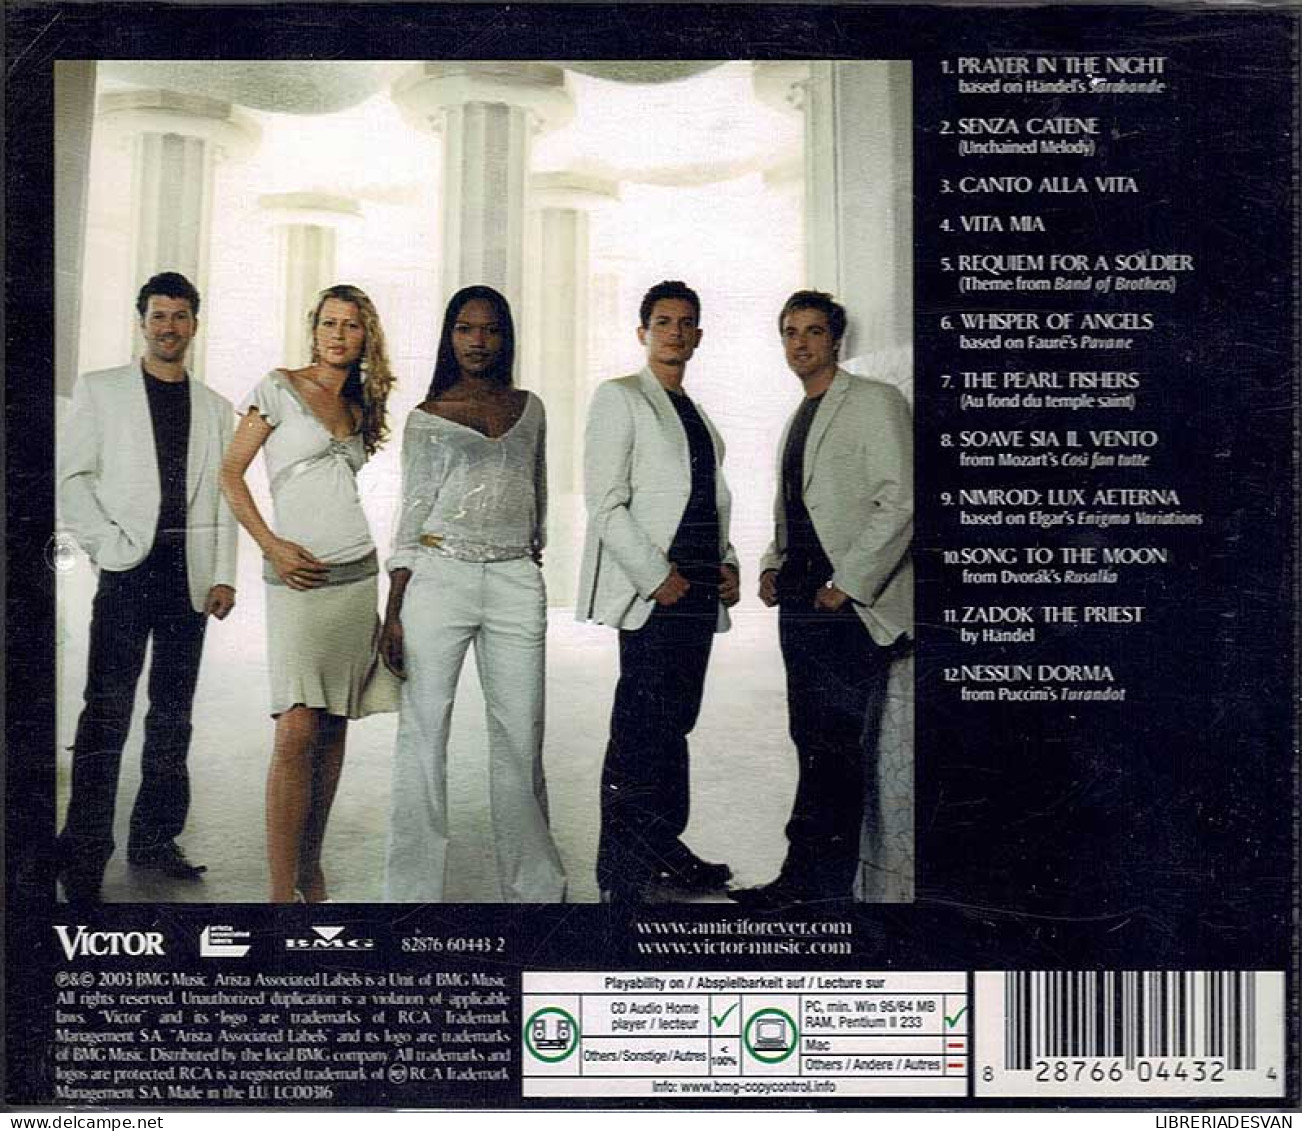 Amici Forever - The Opera Band. CD - Classical